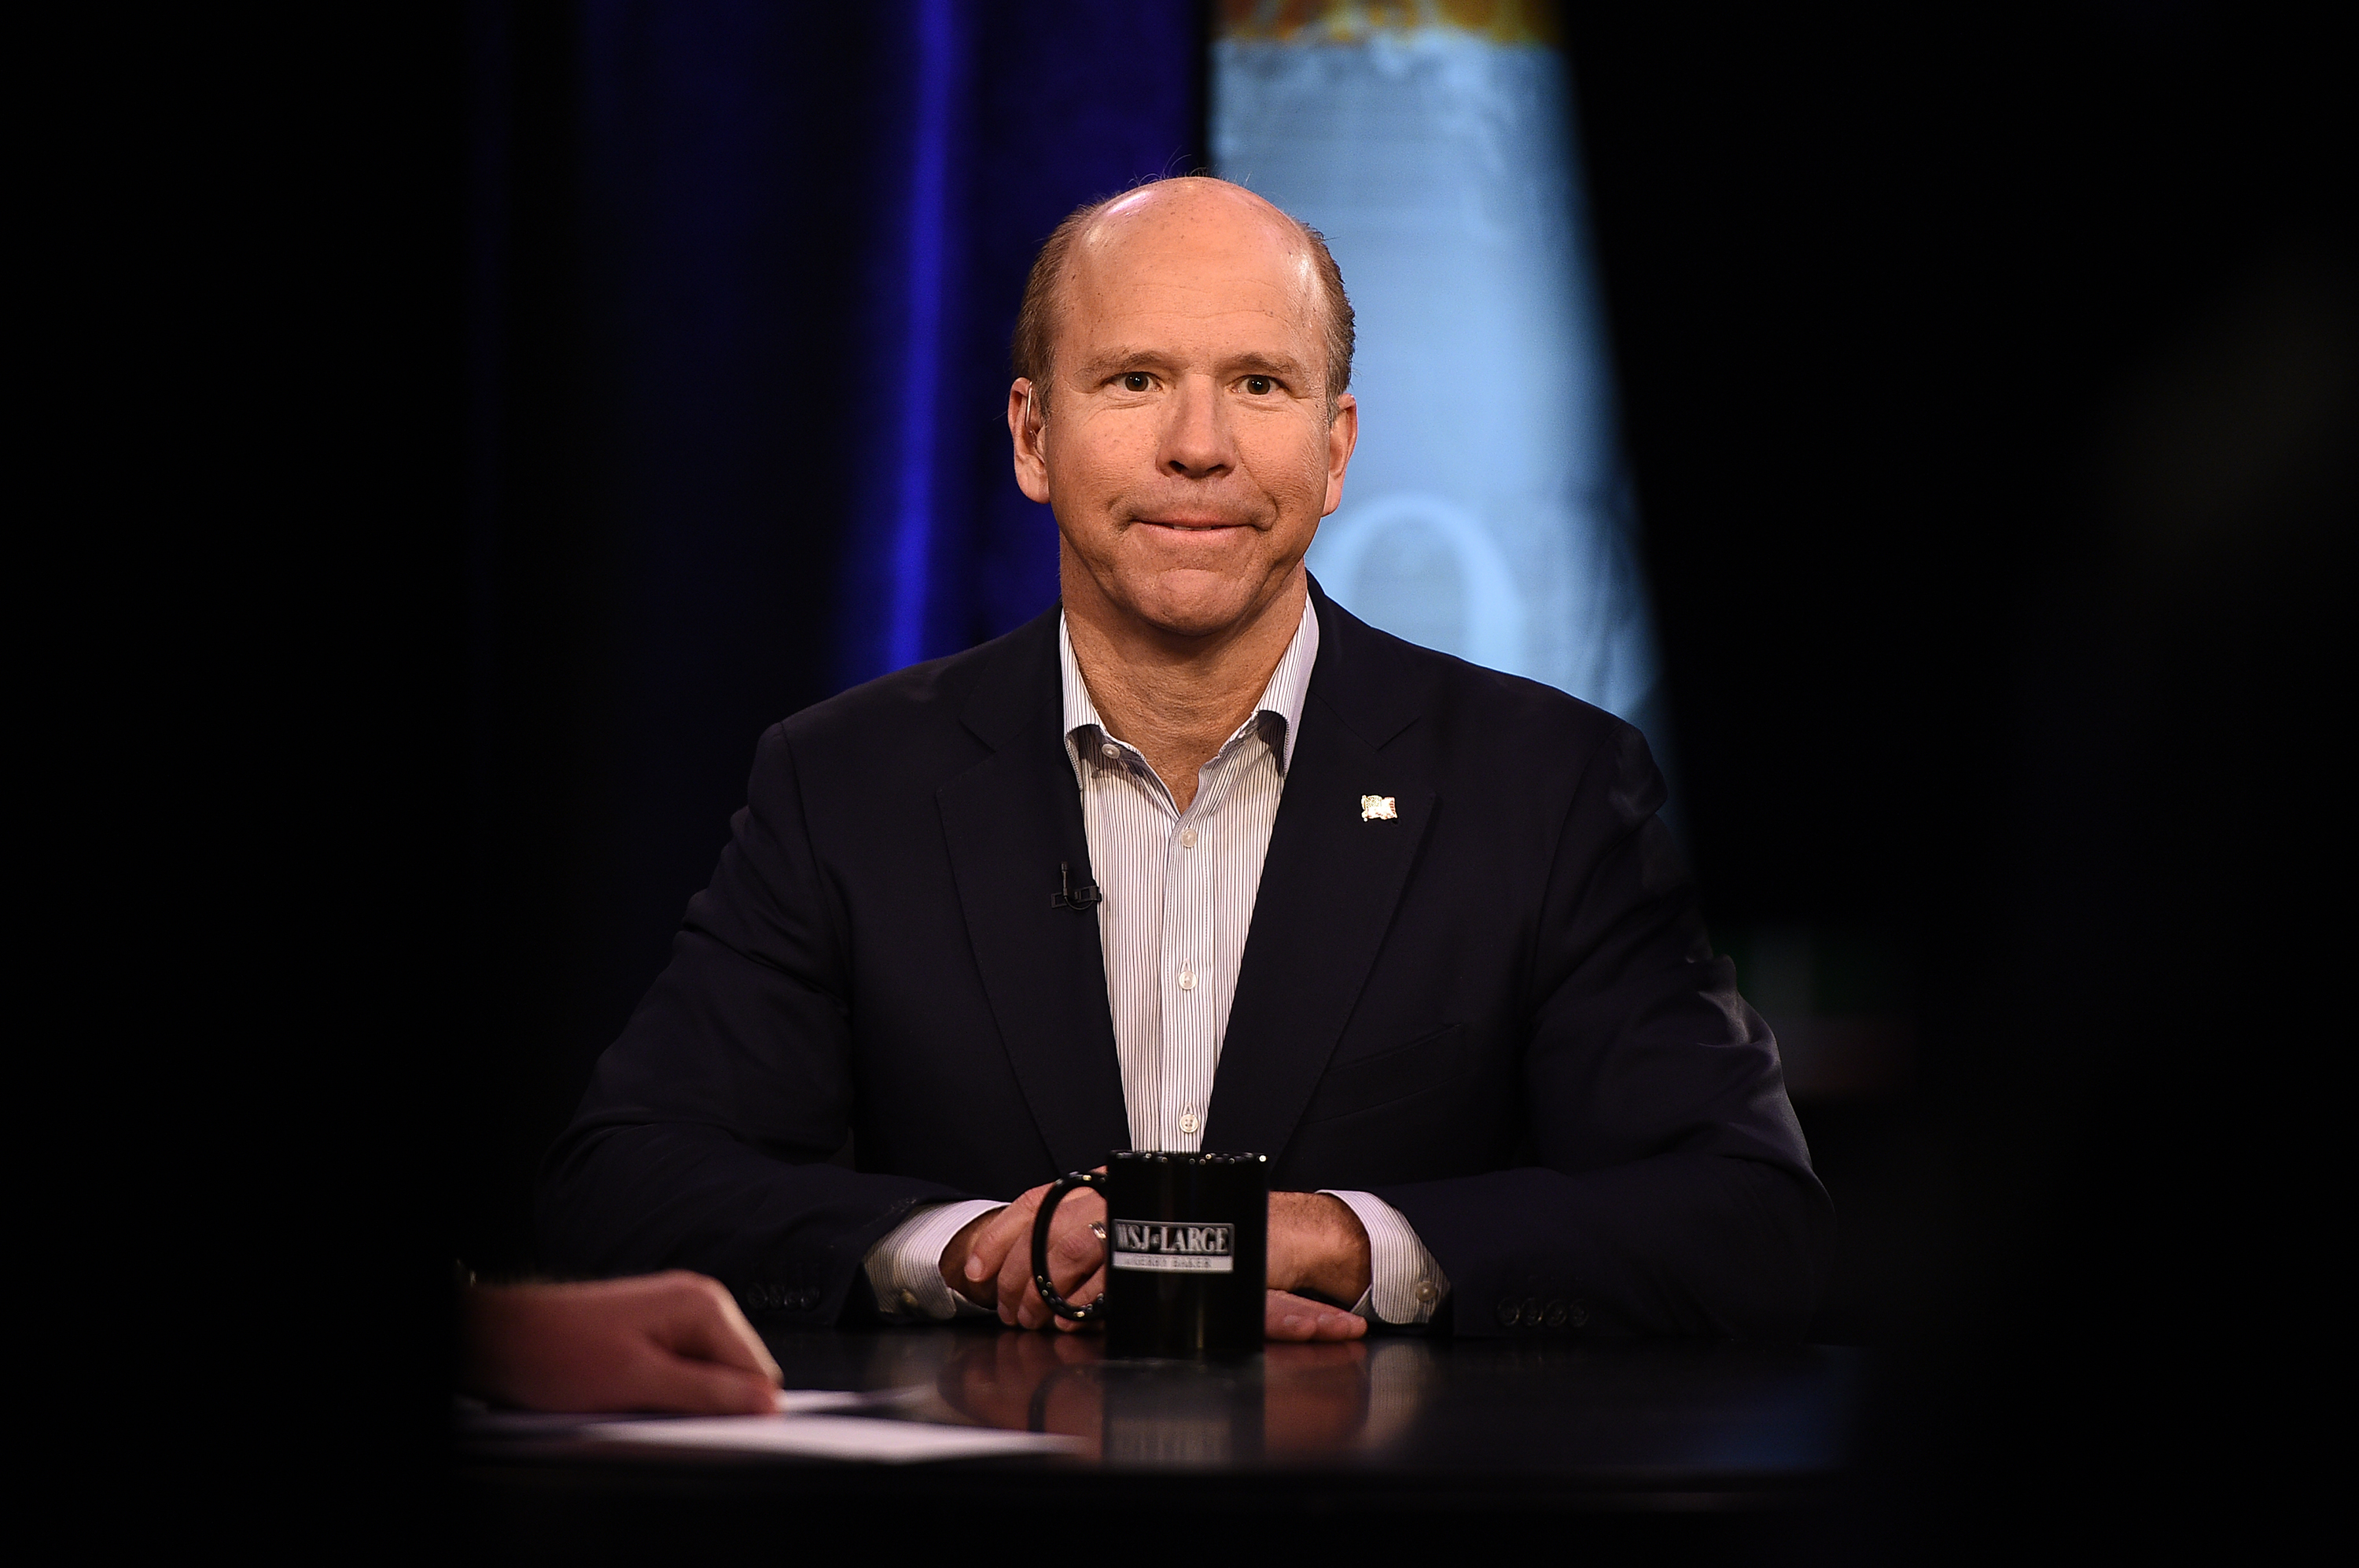 Presidential candidate John Delaney attends a taping of "WSJ At Large with Gerry Baker" (which will air Friday, March 29th) at Fox Business Network Studios on March 27, 2019 in New York City. (Theo Wargo—Getty Images Presidential candidate John Delaney attends a taping of "WSJ At Large with Gerry Baker" (which will air Friday, March 29th) at Fox Business Network Studios on March 27, 2019 in New York City.)